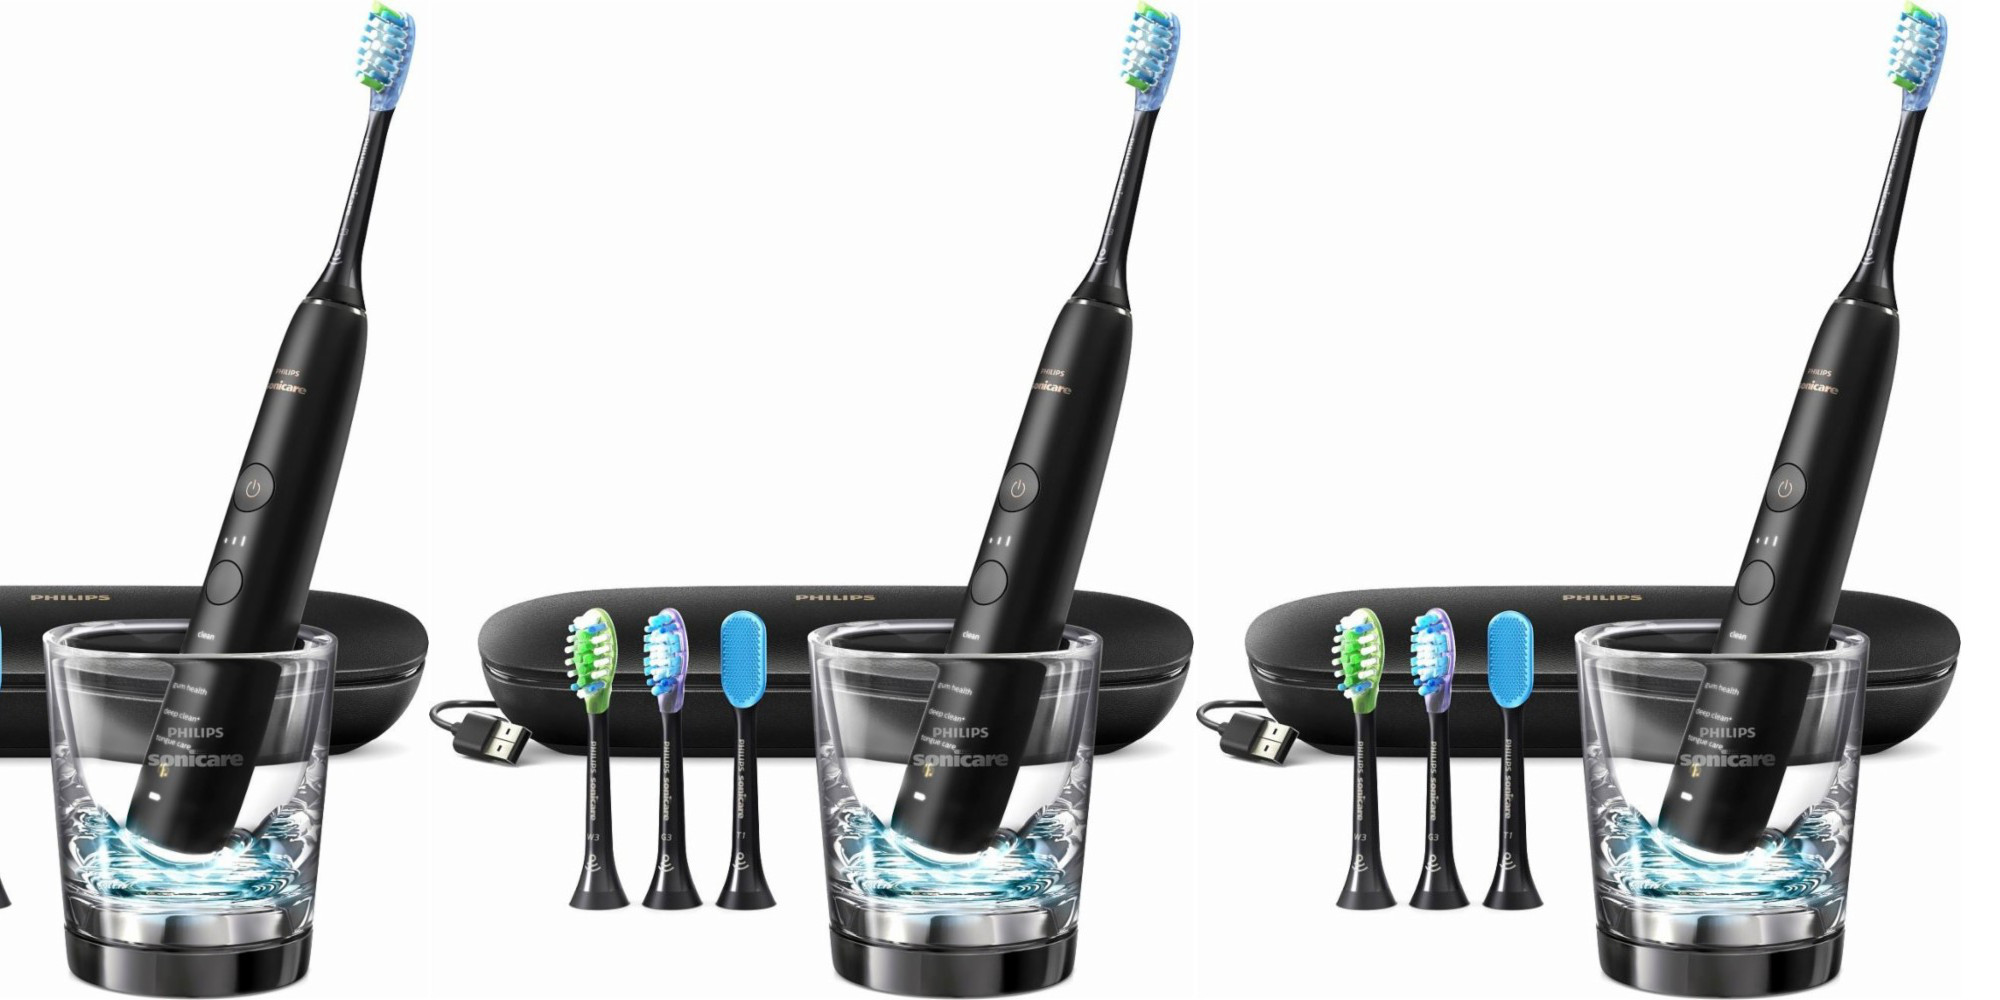 Philips Sonicare iOS/Android Smart Electric Toothbrush: $160 shipped (Reg. $240 ...